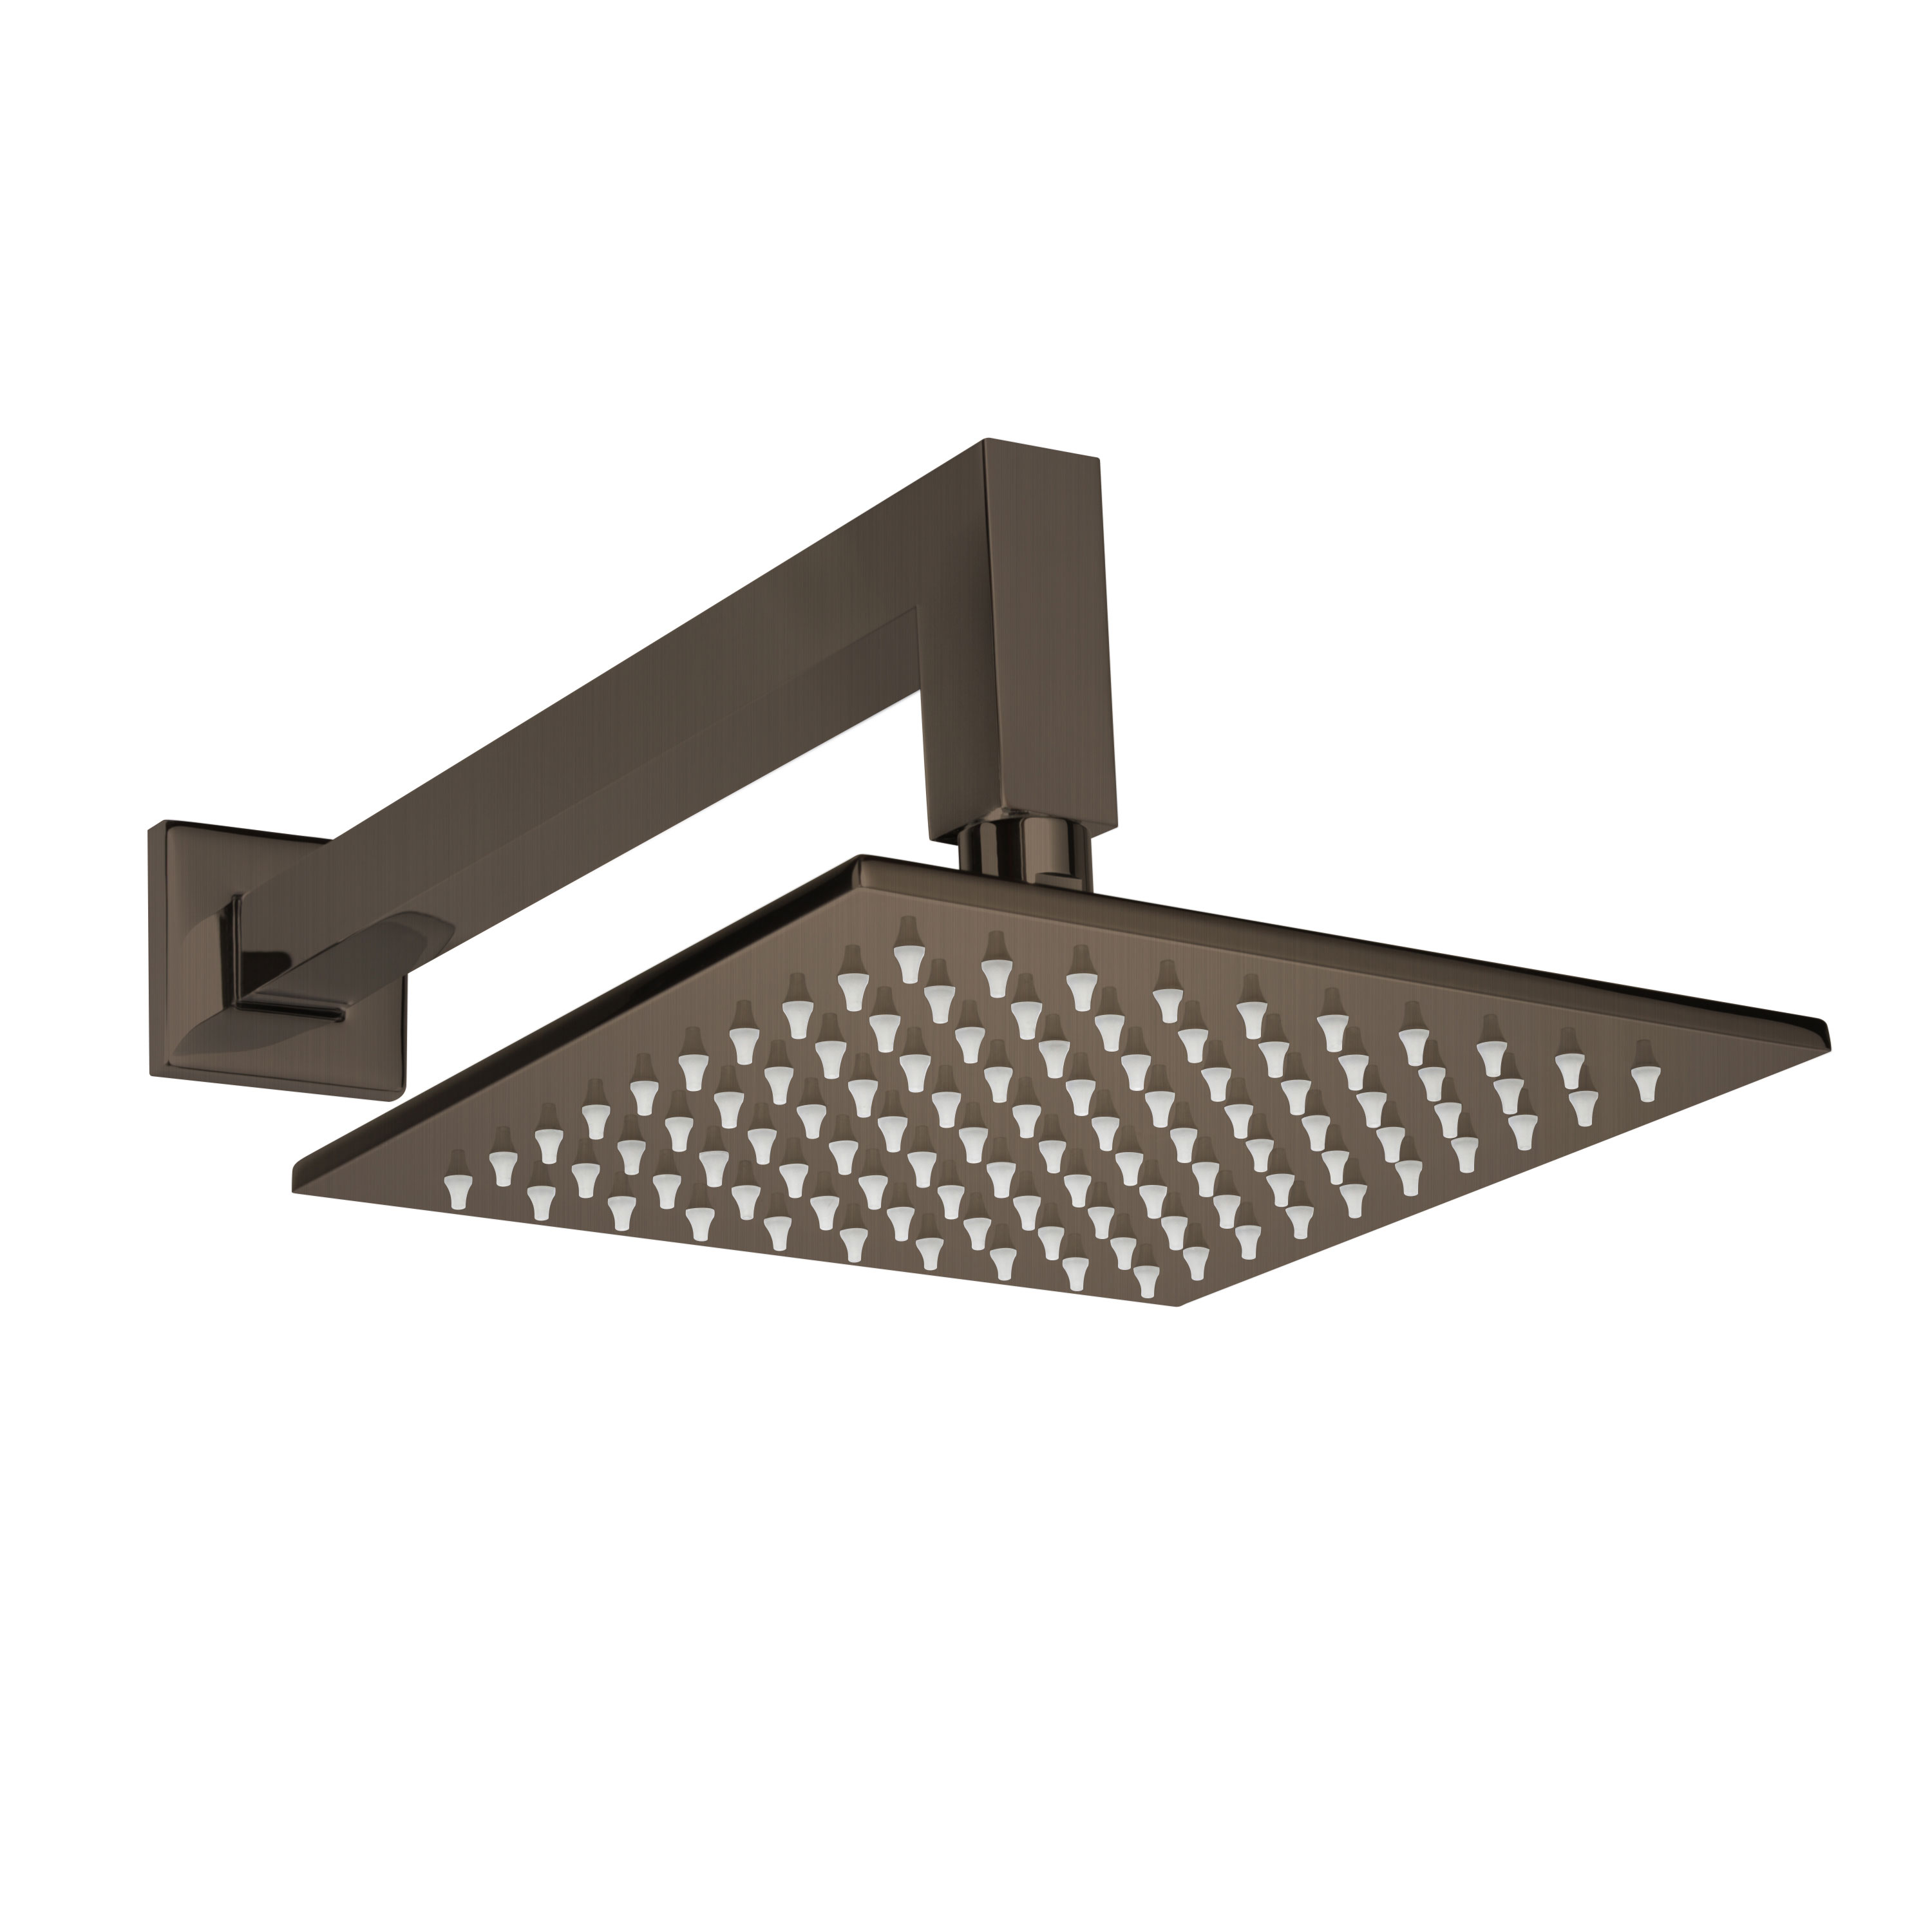 Thermasol 15-1009-ORB 200mm x 200mm x 10mm, 304SS Rain Head 1/2" Inlet Square - Oil Rubbed Bronze